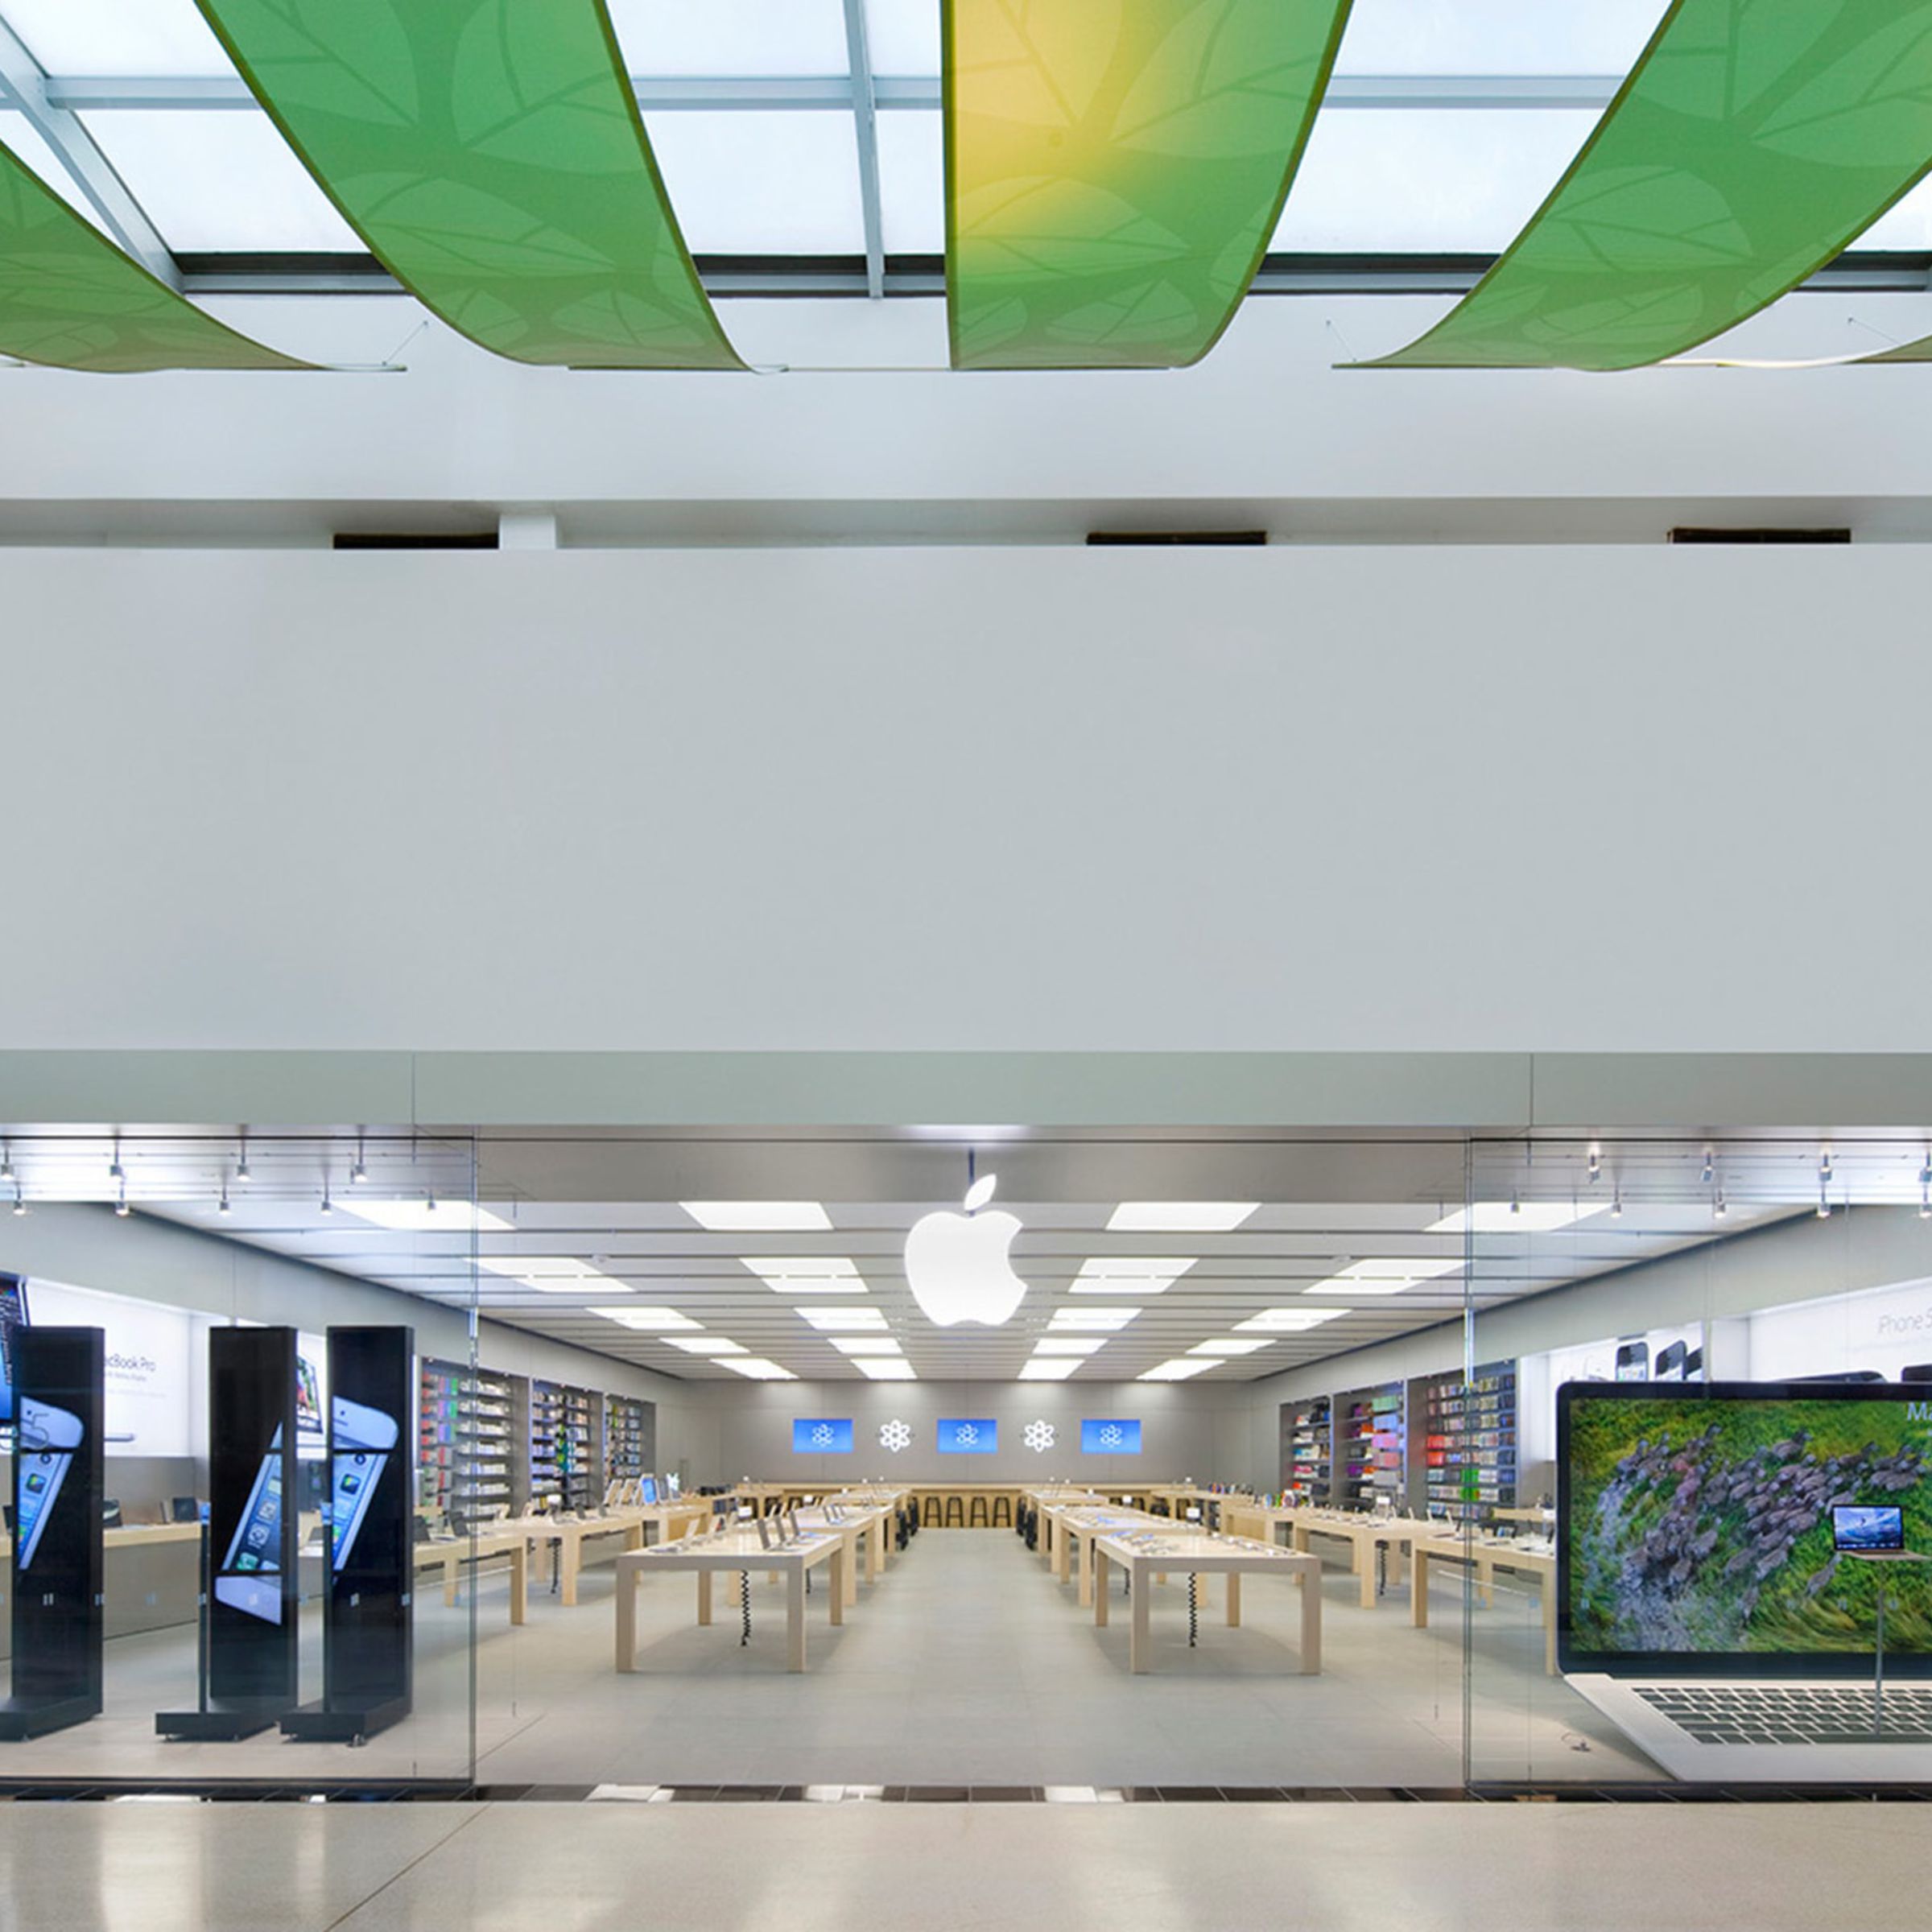 Employees at Apple’s Towson Town Center may soon be voting on whether to unionize.